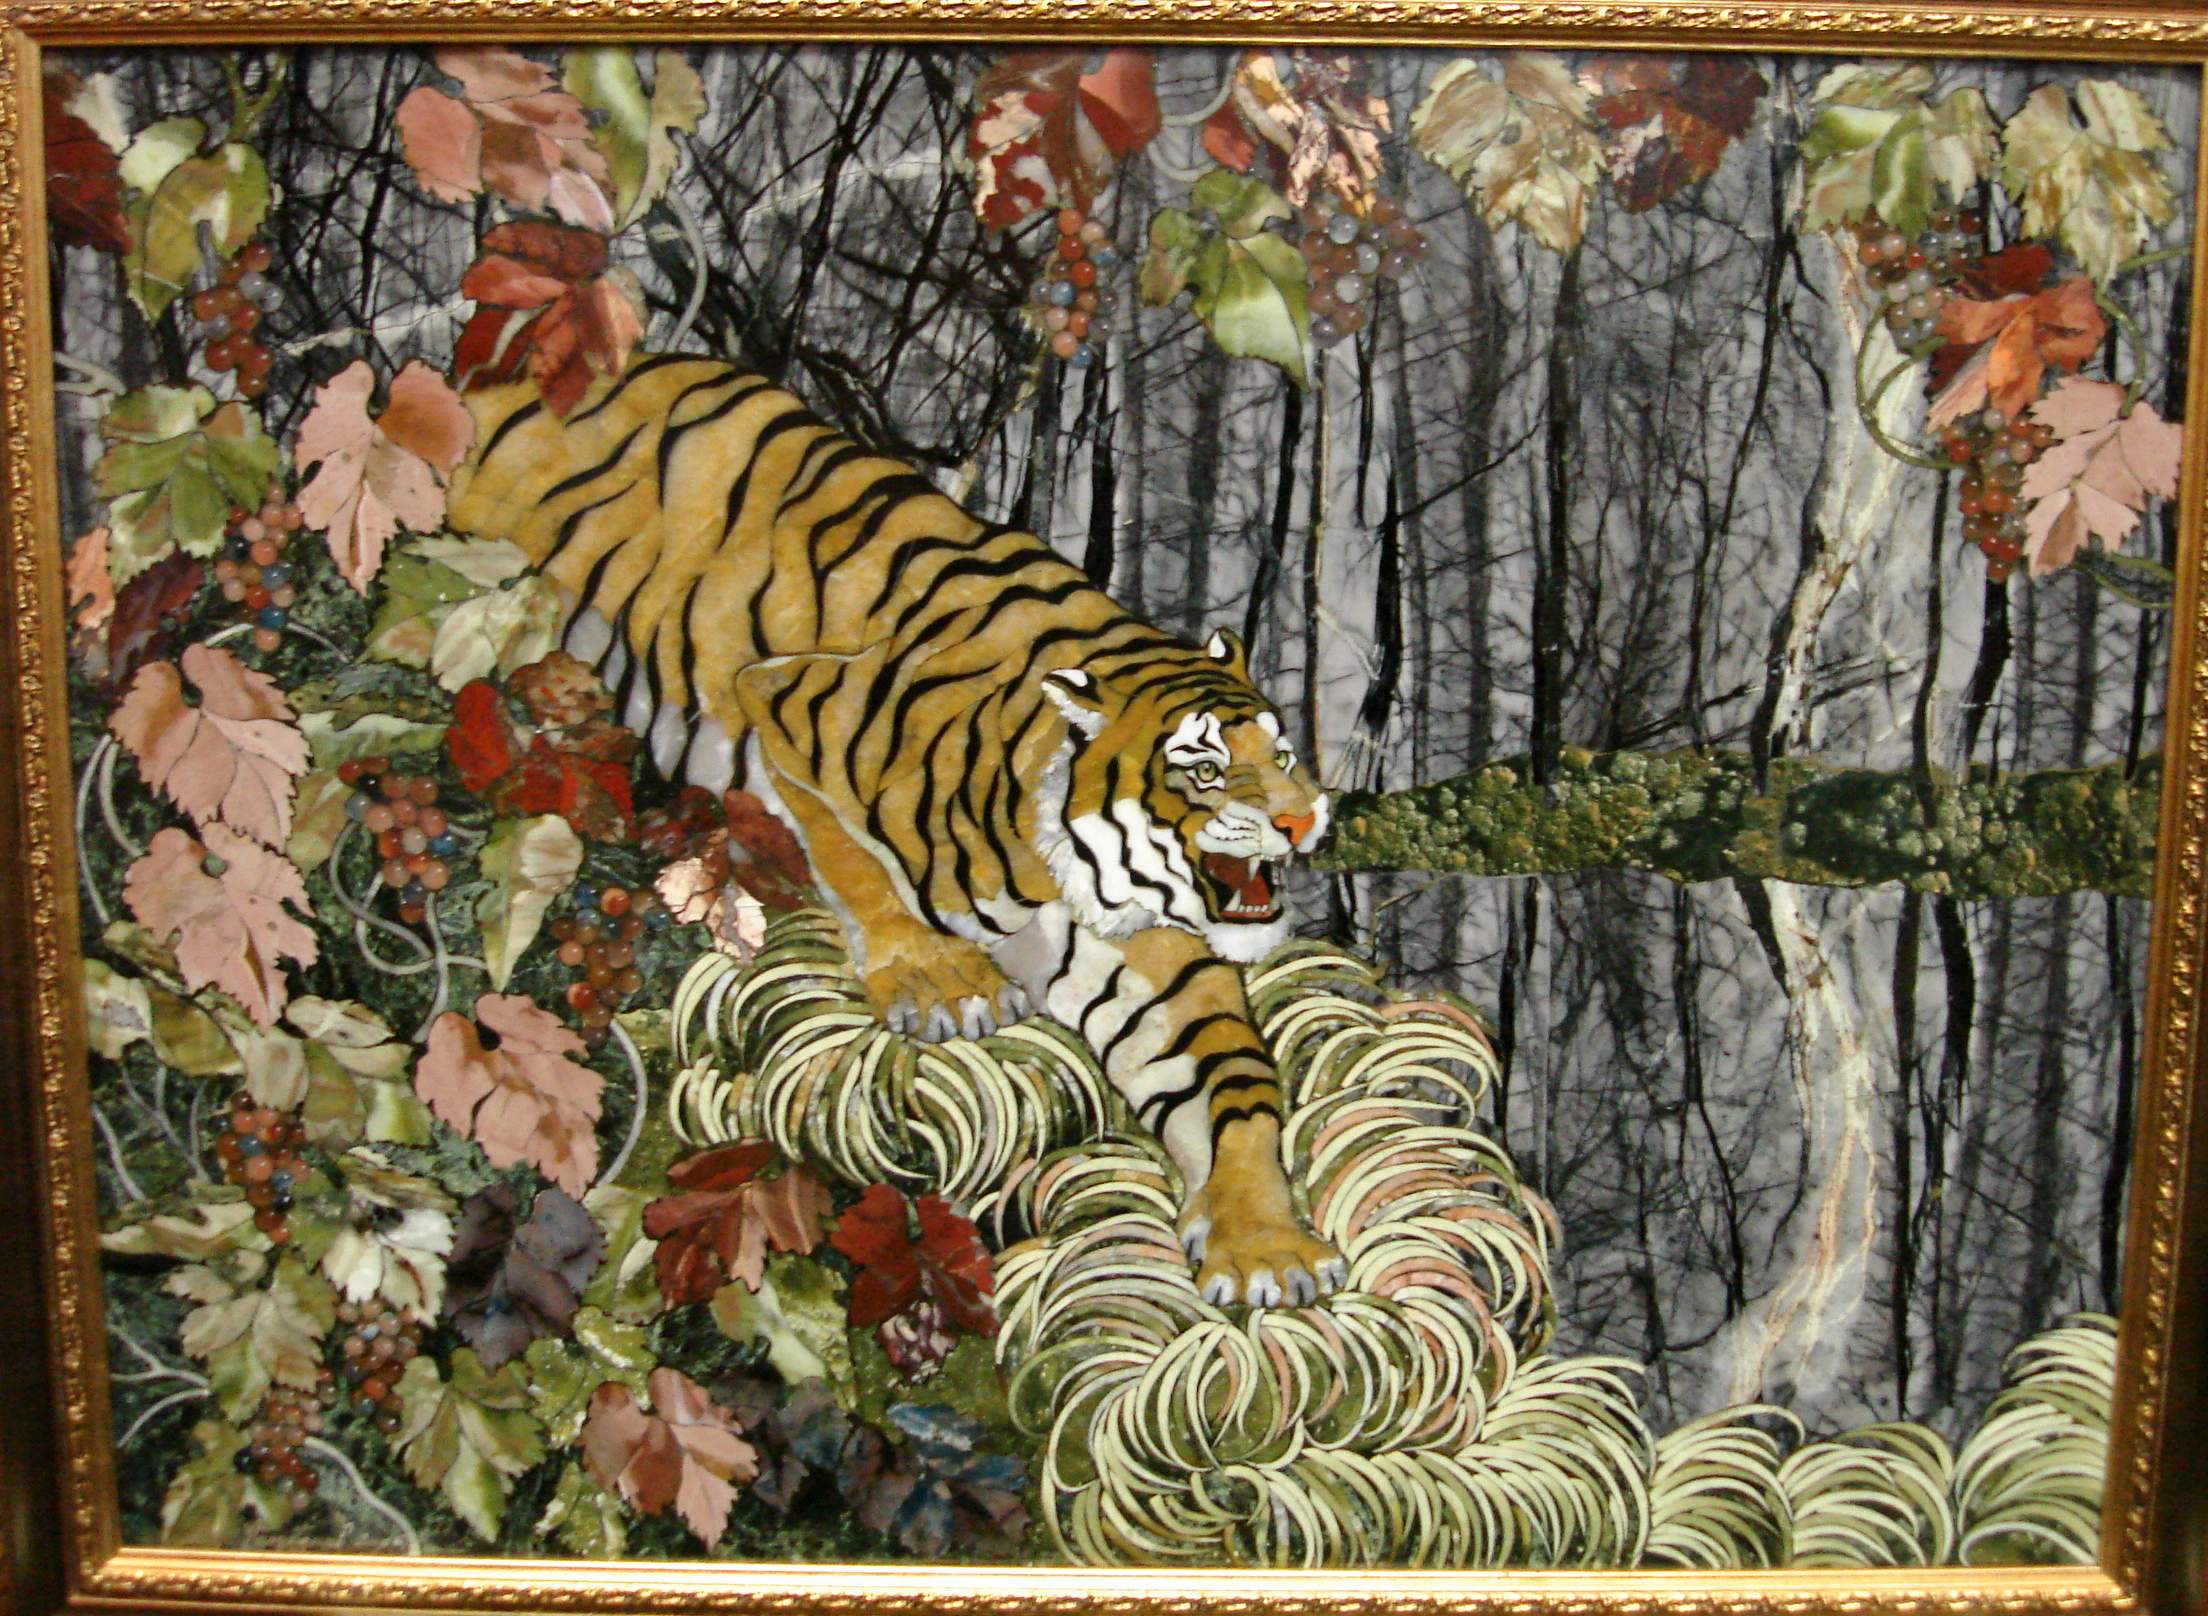 Landscape with a tiger in the autumn forest